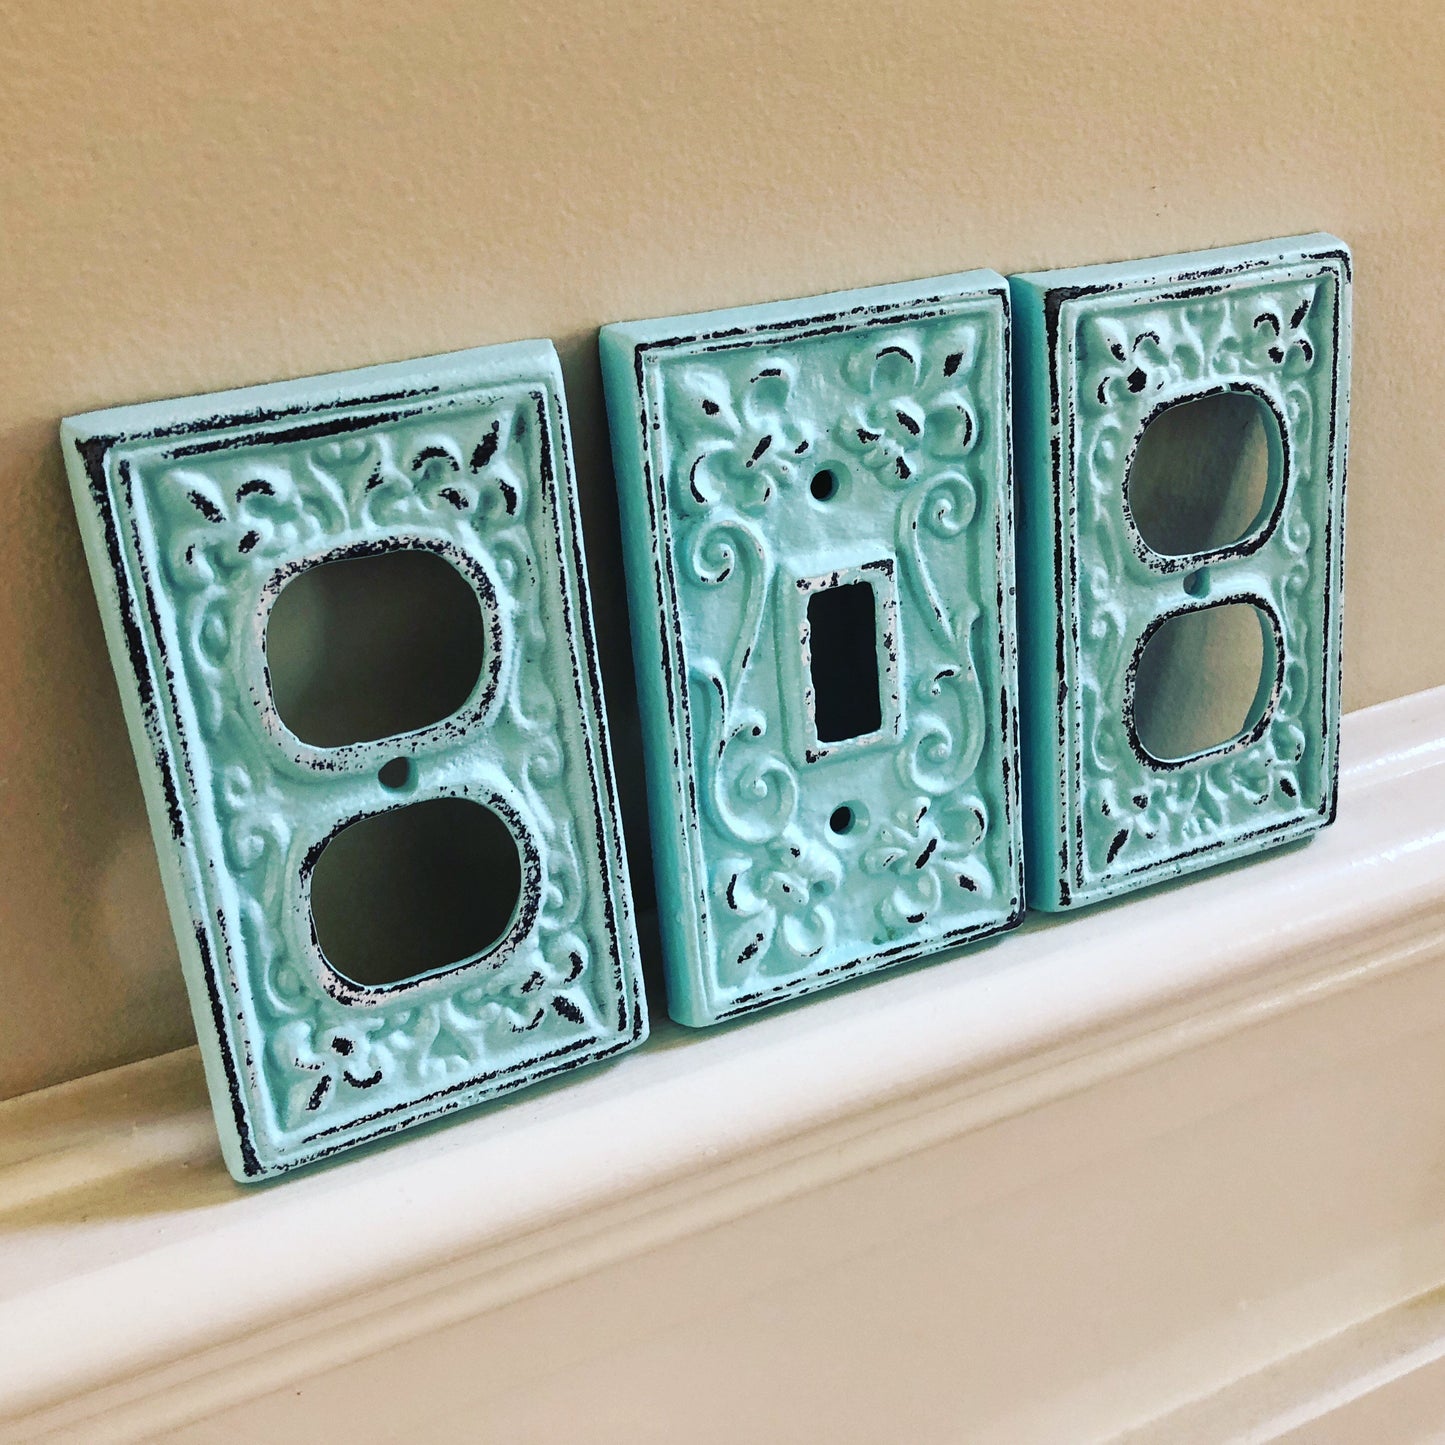 SALE/Cast Iron Double Light Switch Cover/single light switch cover/Nursery/Bedroom/Light Switch Plate/Pick color/Outlet Cover/